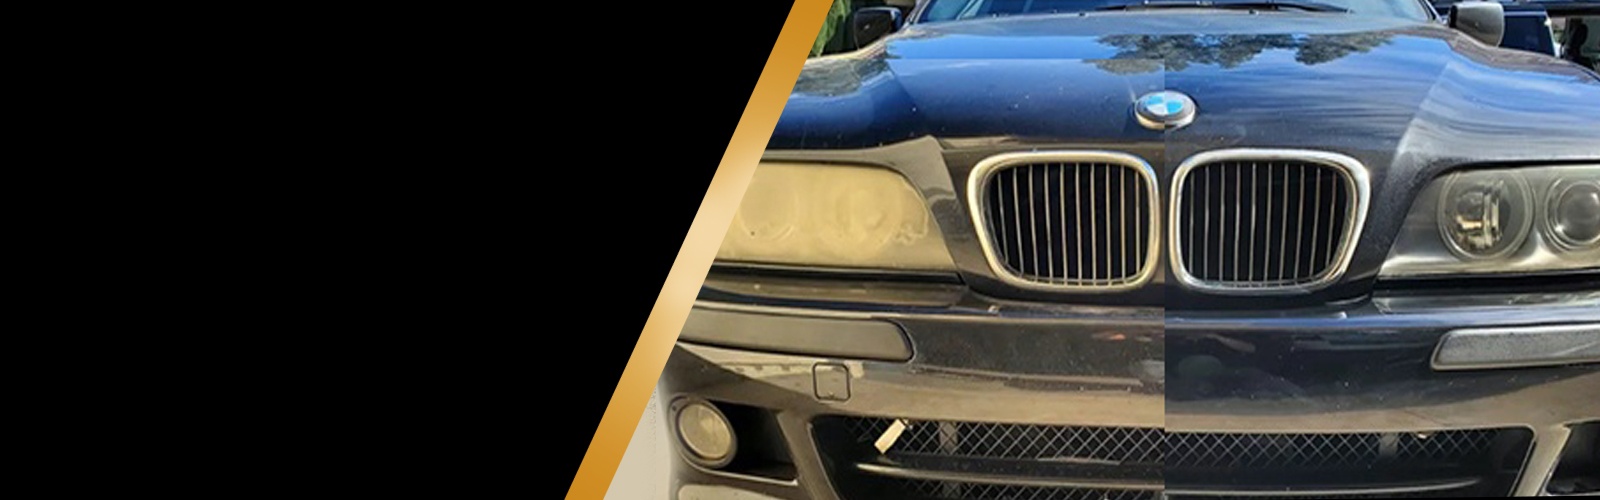 Headlights Looking Foggy or Dull? Then It’s Time For Restoring Them For Better Visibility And Giving Your Car A New Look